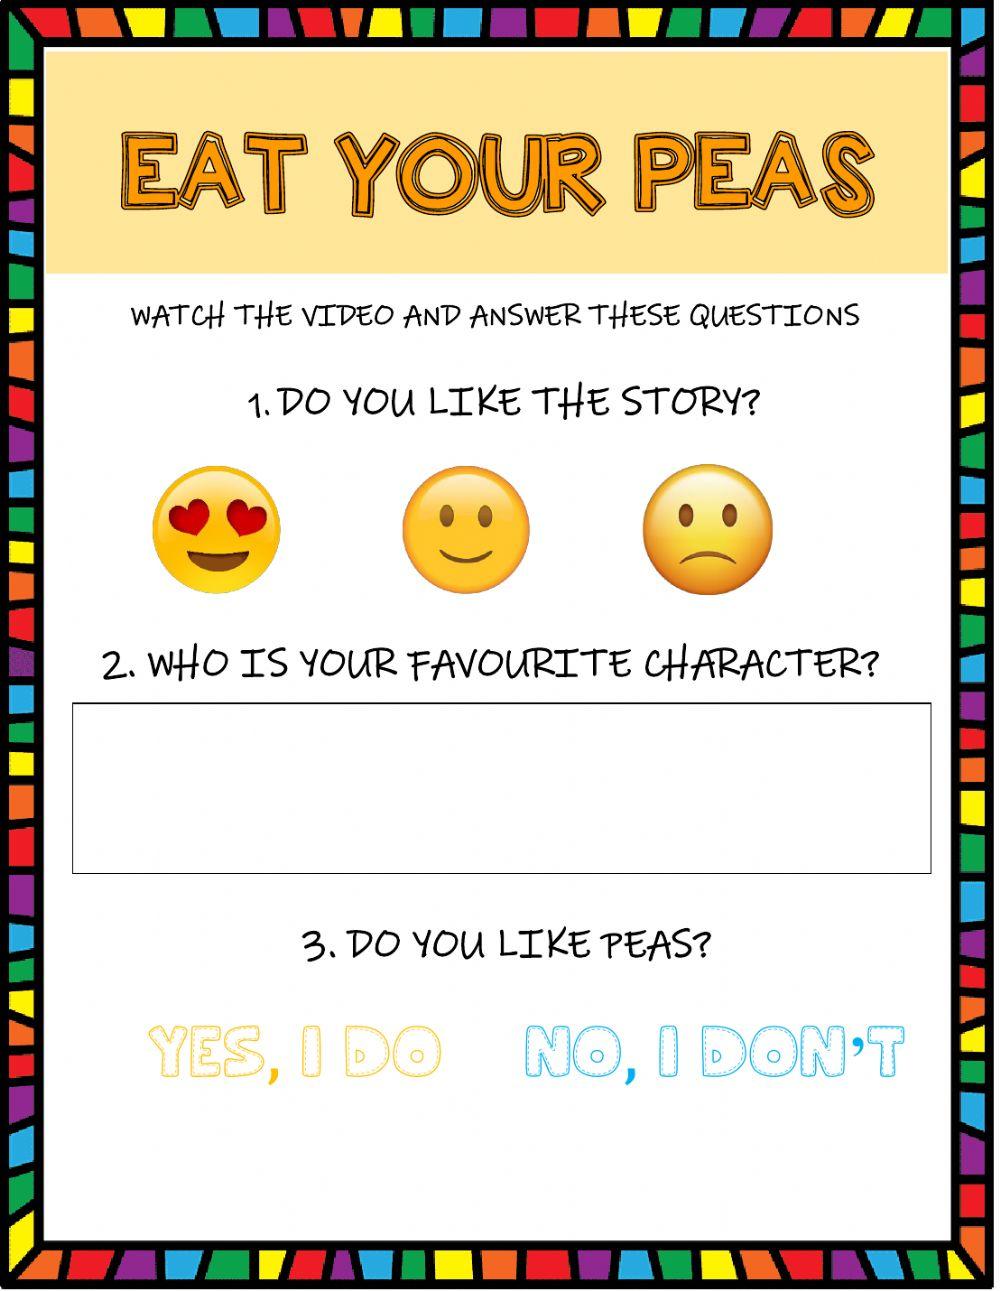 Eat your peas